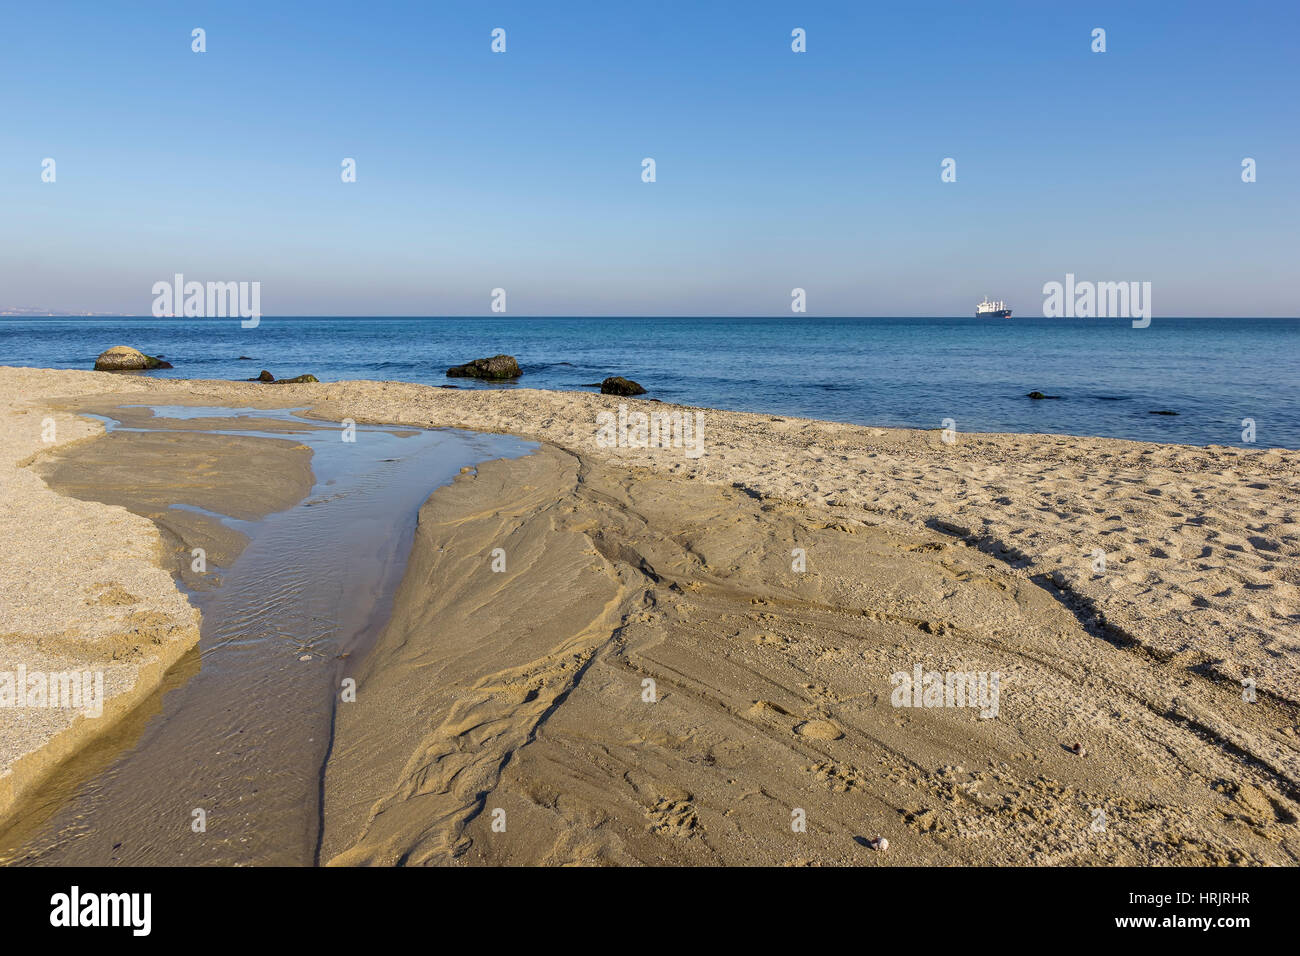 Day view of a small river flowing into the sea Stock Photo